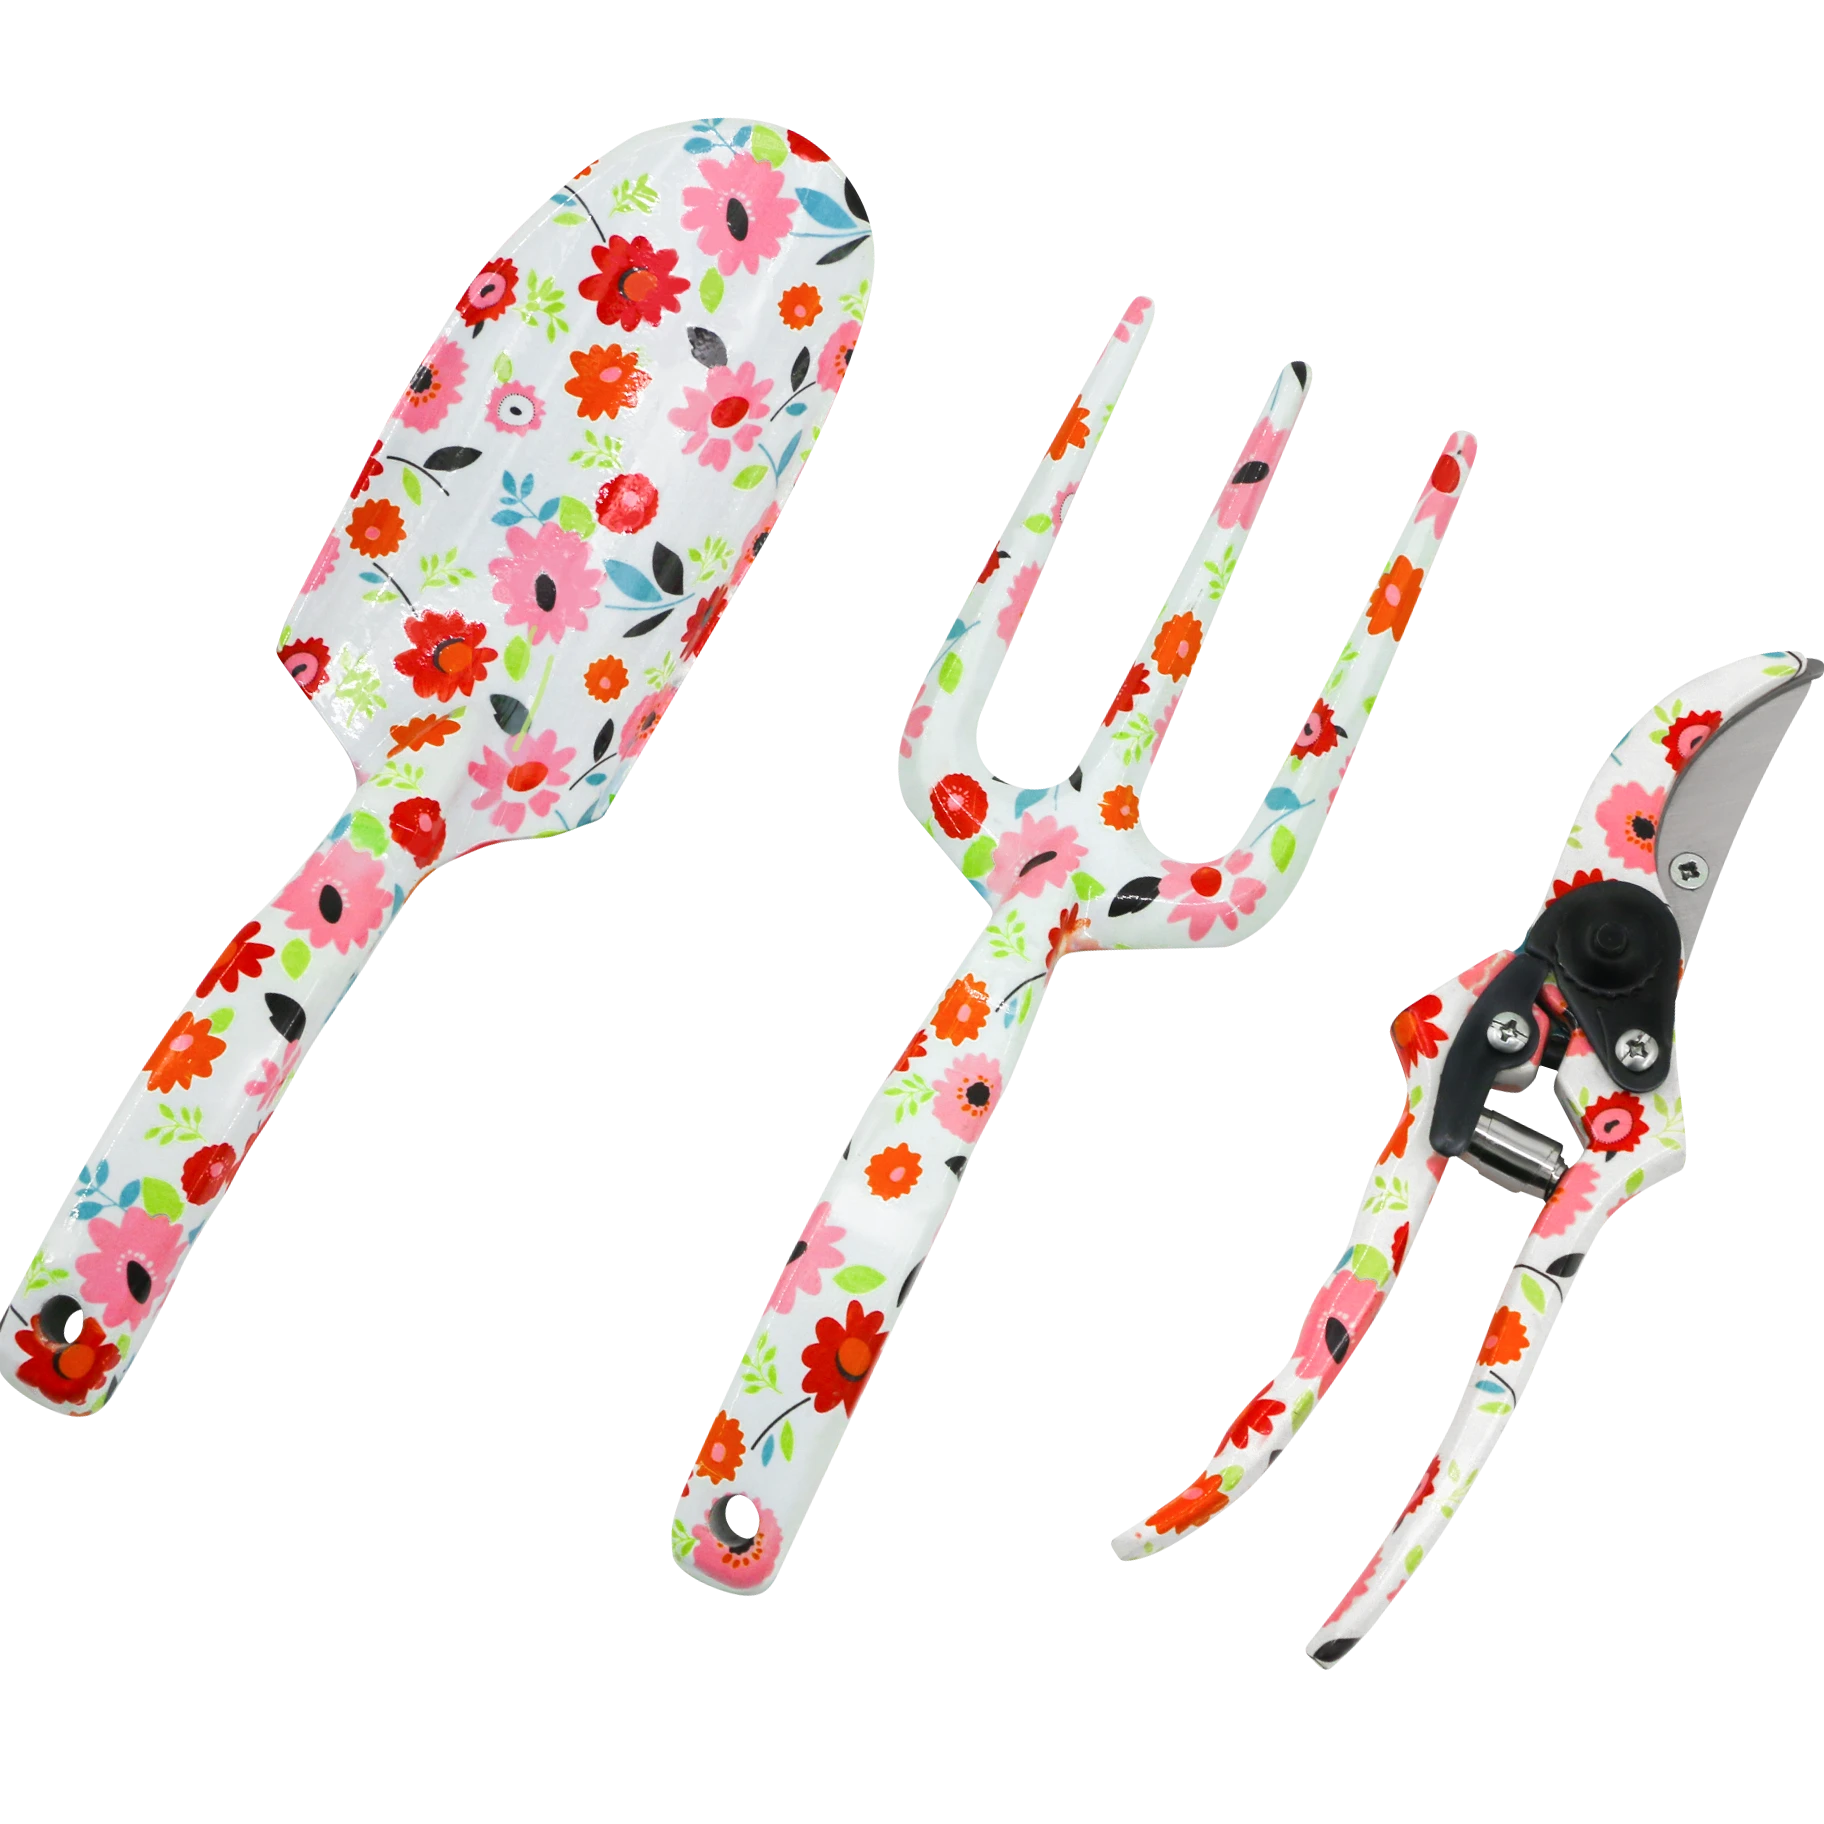 2020 Cheap Floral Printed Garden Hand Tools Aluminum 2 pcs Garden Tool Sets in Gift Box